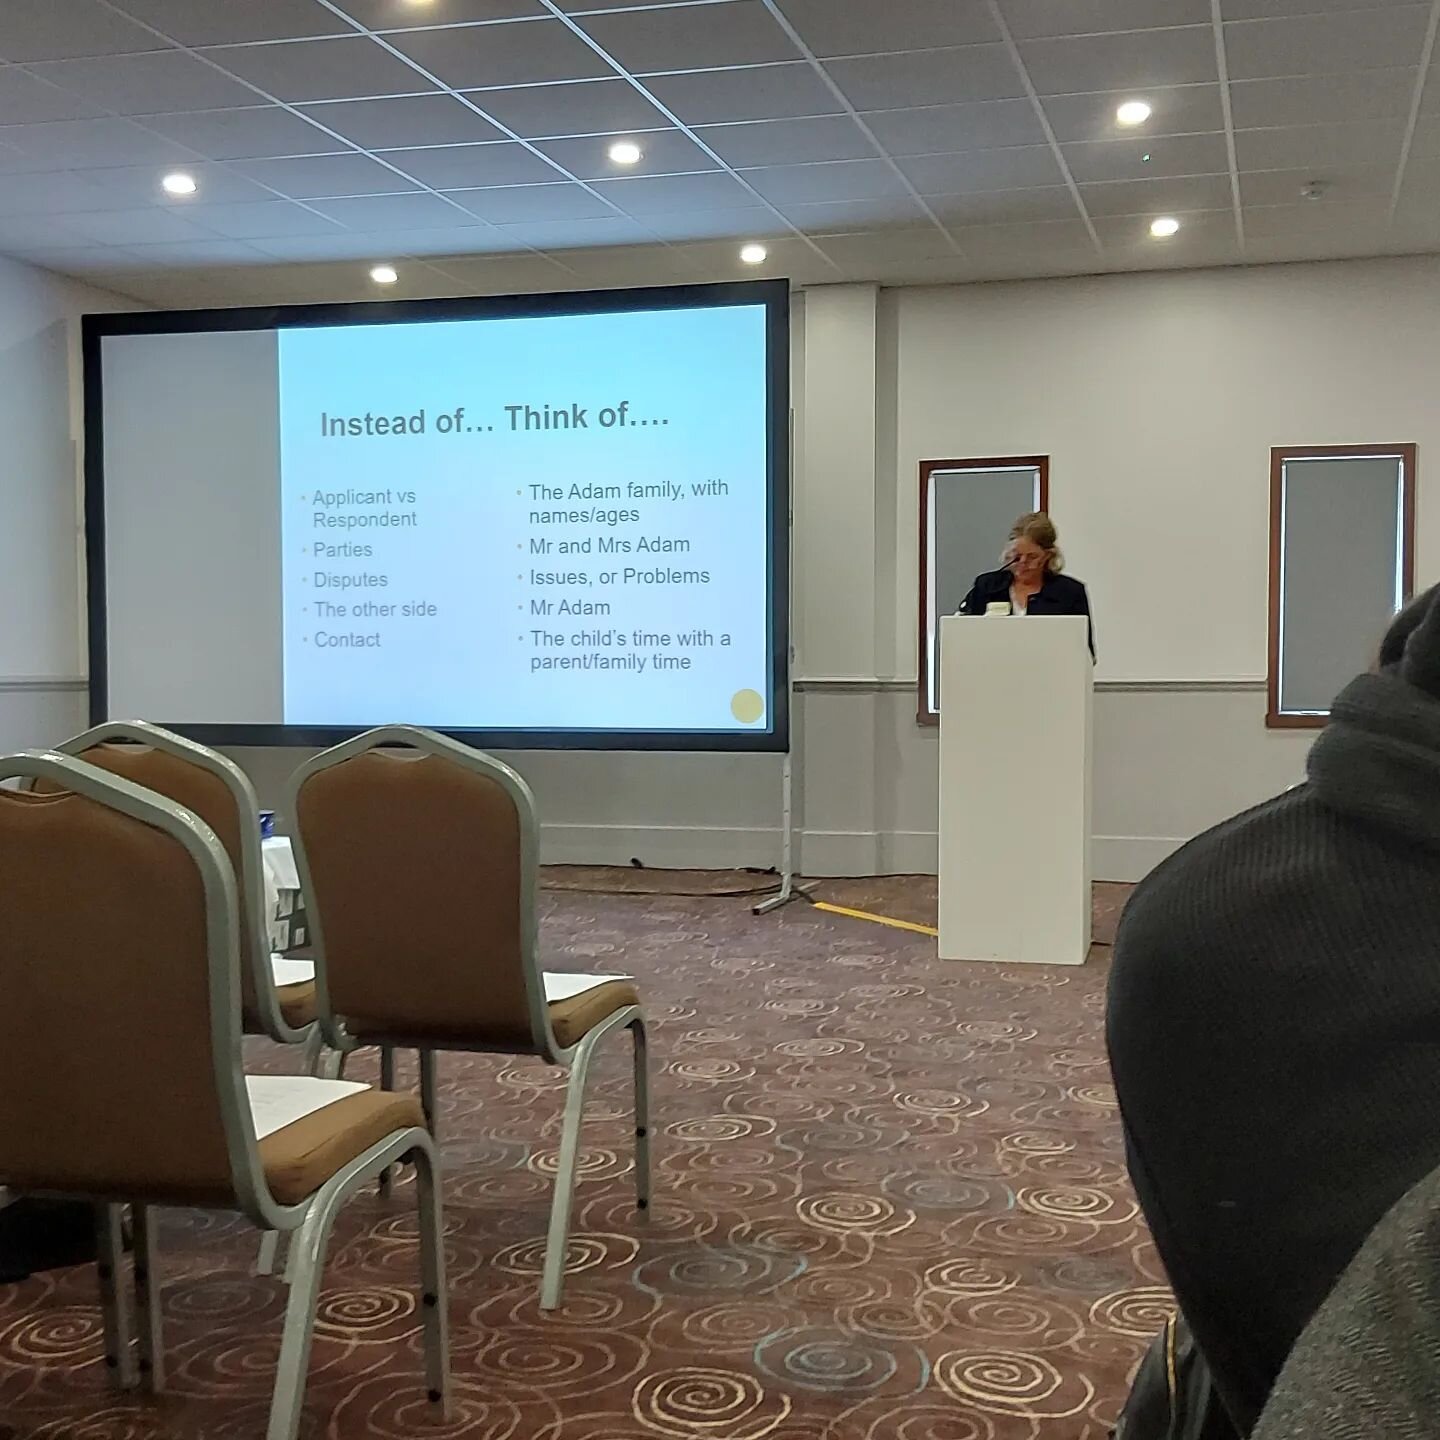 Helen Adam talks about #language at the Family Justice Council Conference  #watchyourlanguage #familylaw #thefamilylawlanguageproject #legallanguage #law #Bristol